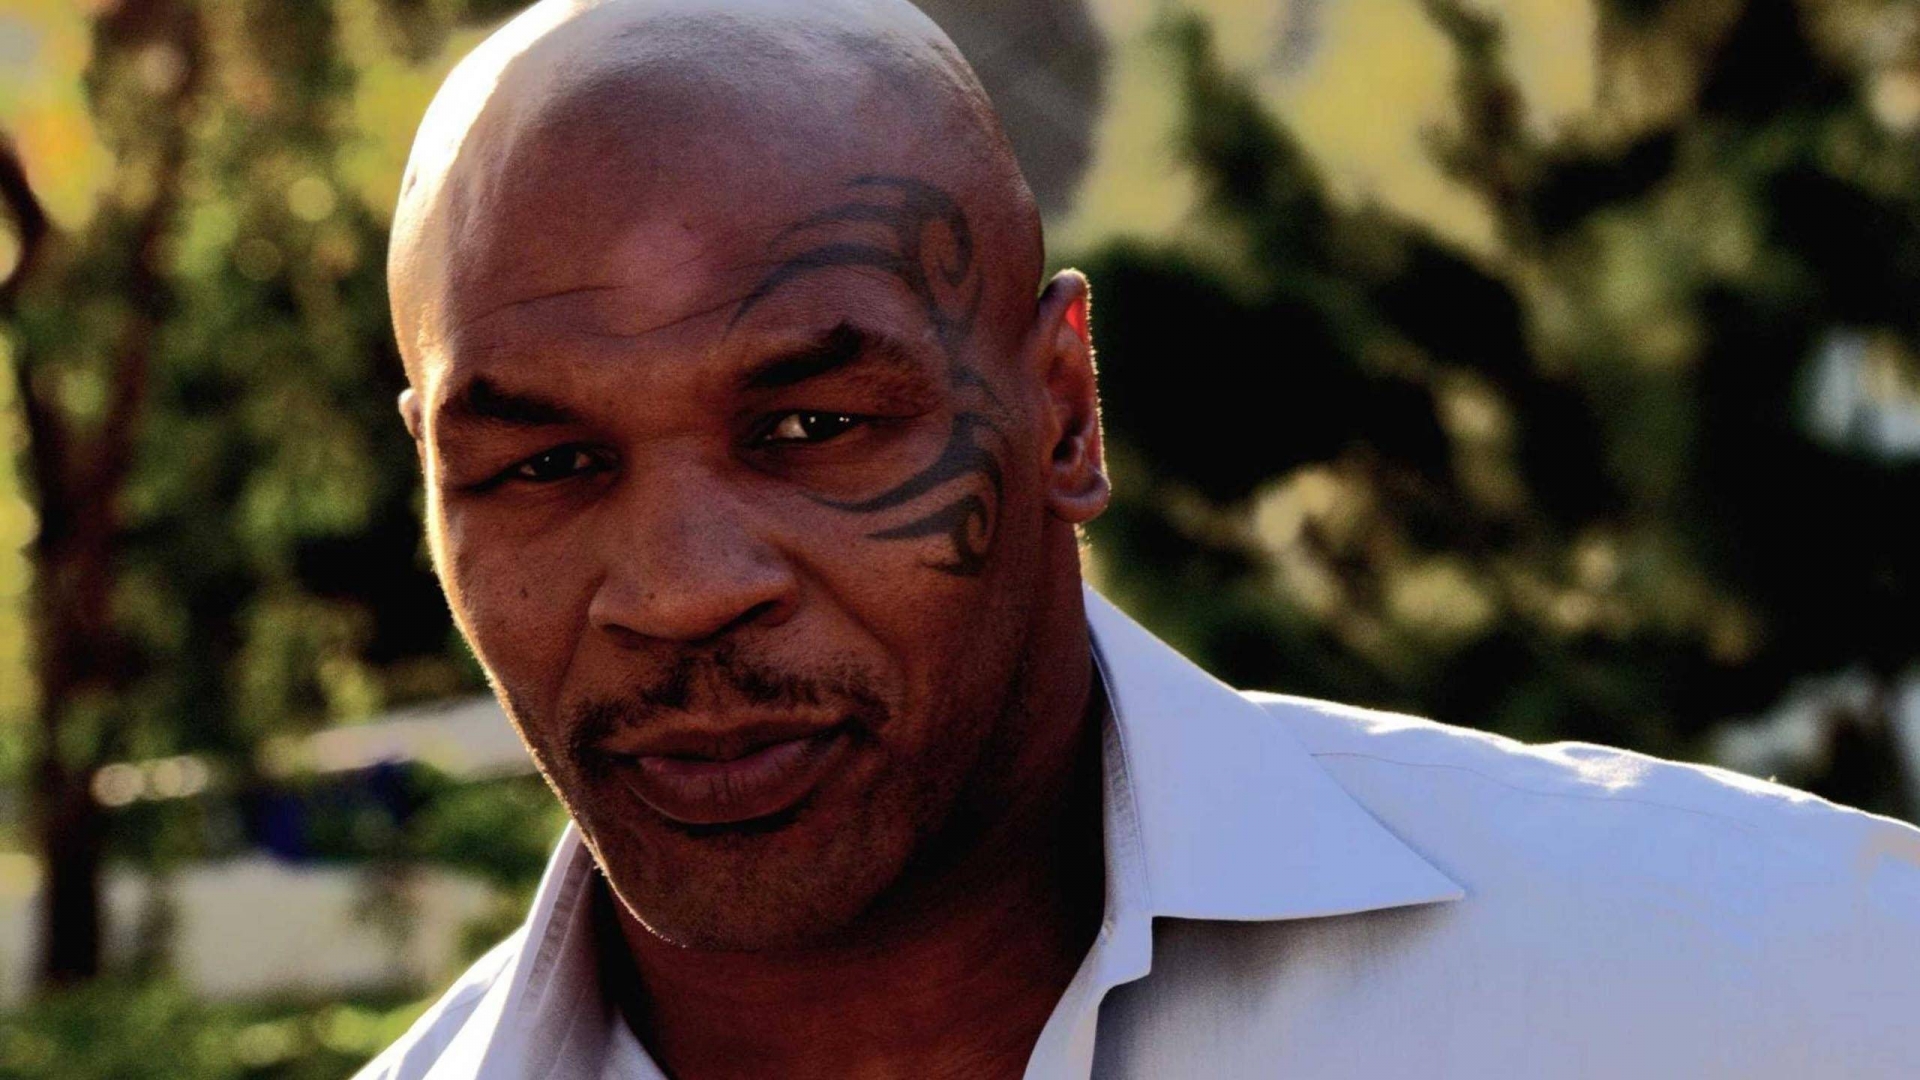 Mike Tyson Close-Up for 1920 x 1080 HDTV 1080p resolution